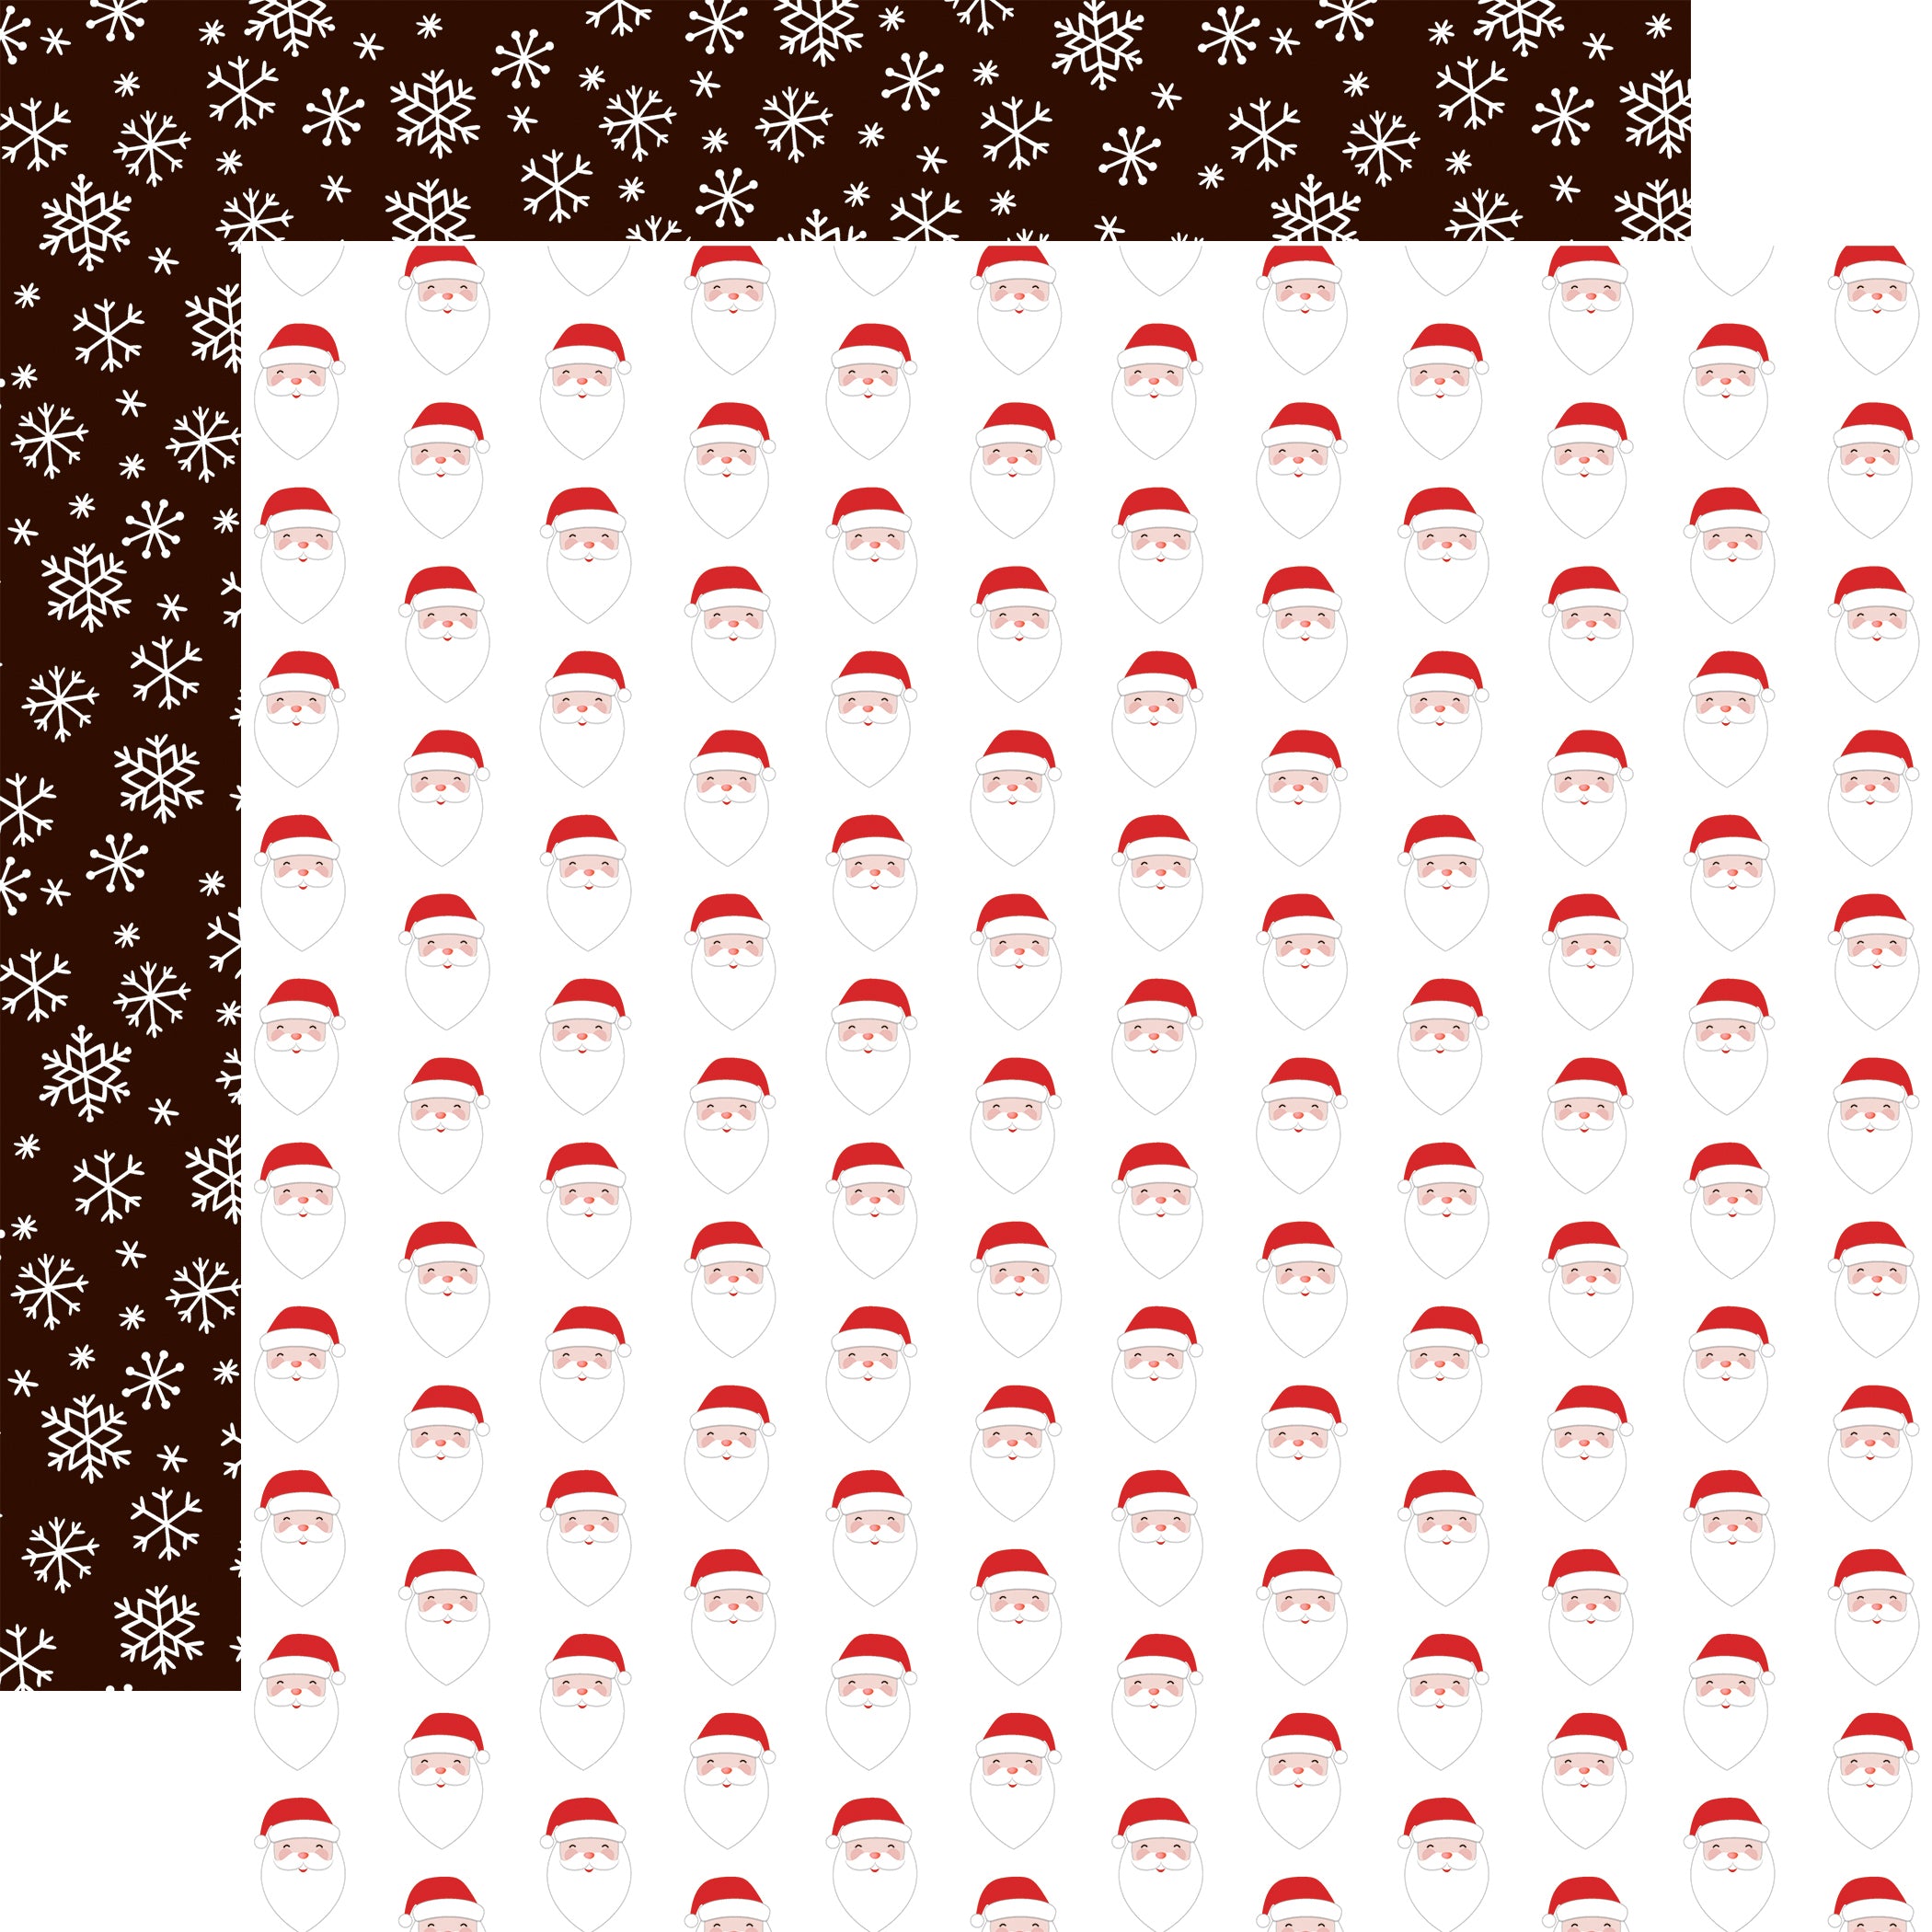 Have A Holly Jolly Christmas Collection Symbol Of Christmas 12 x 12 Double-Sided Scrapbook Paper by Echo Park Paper